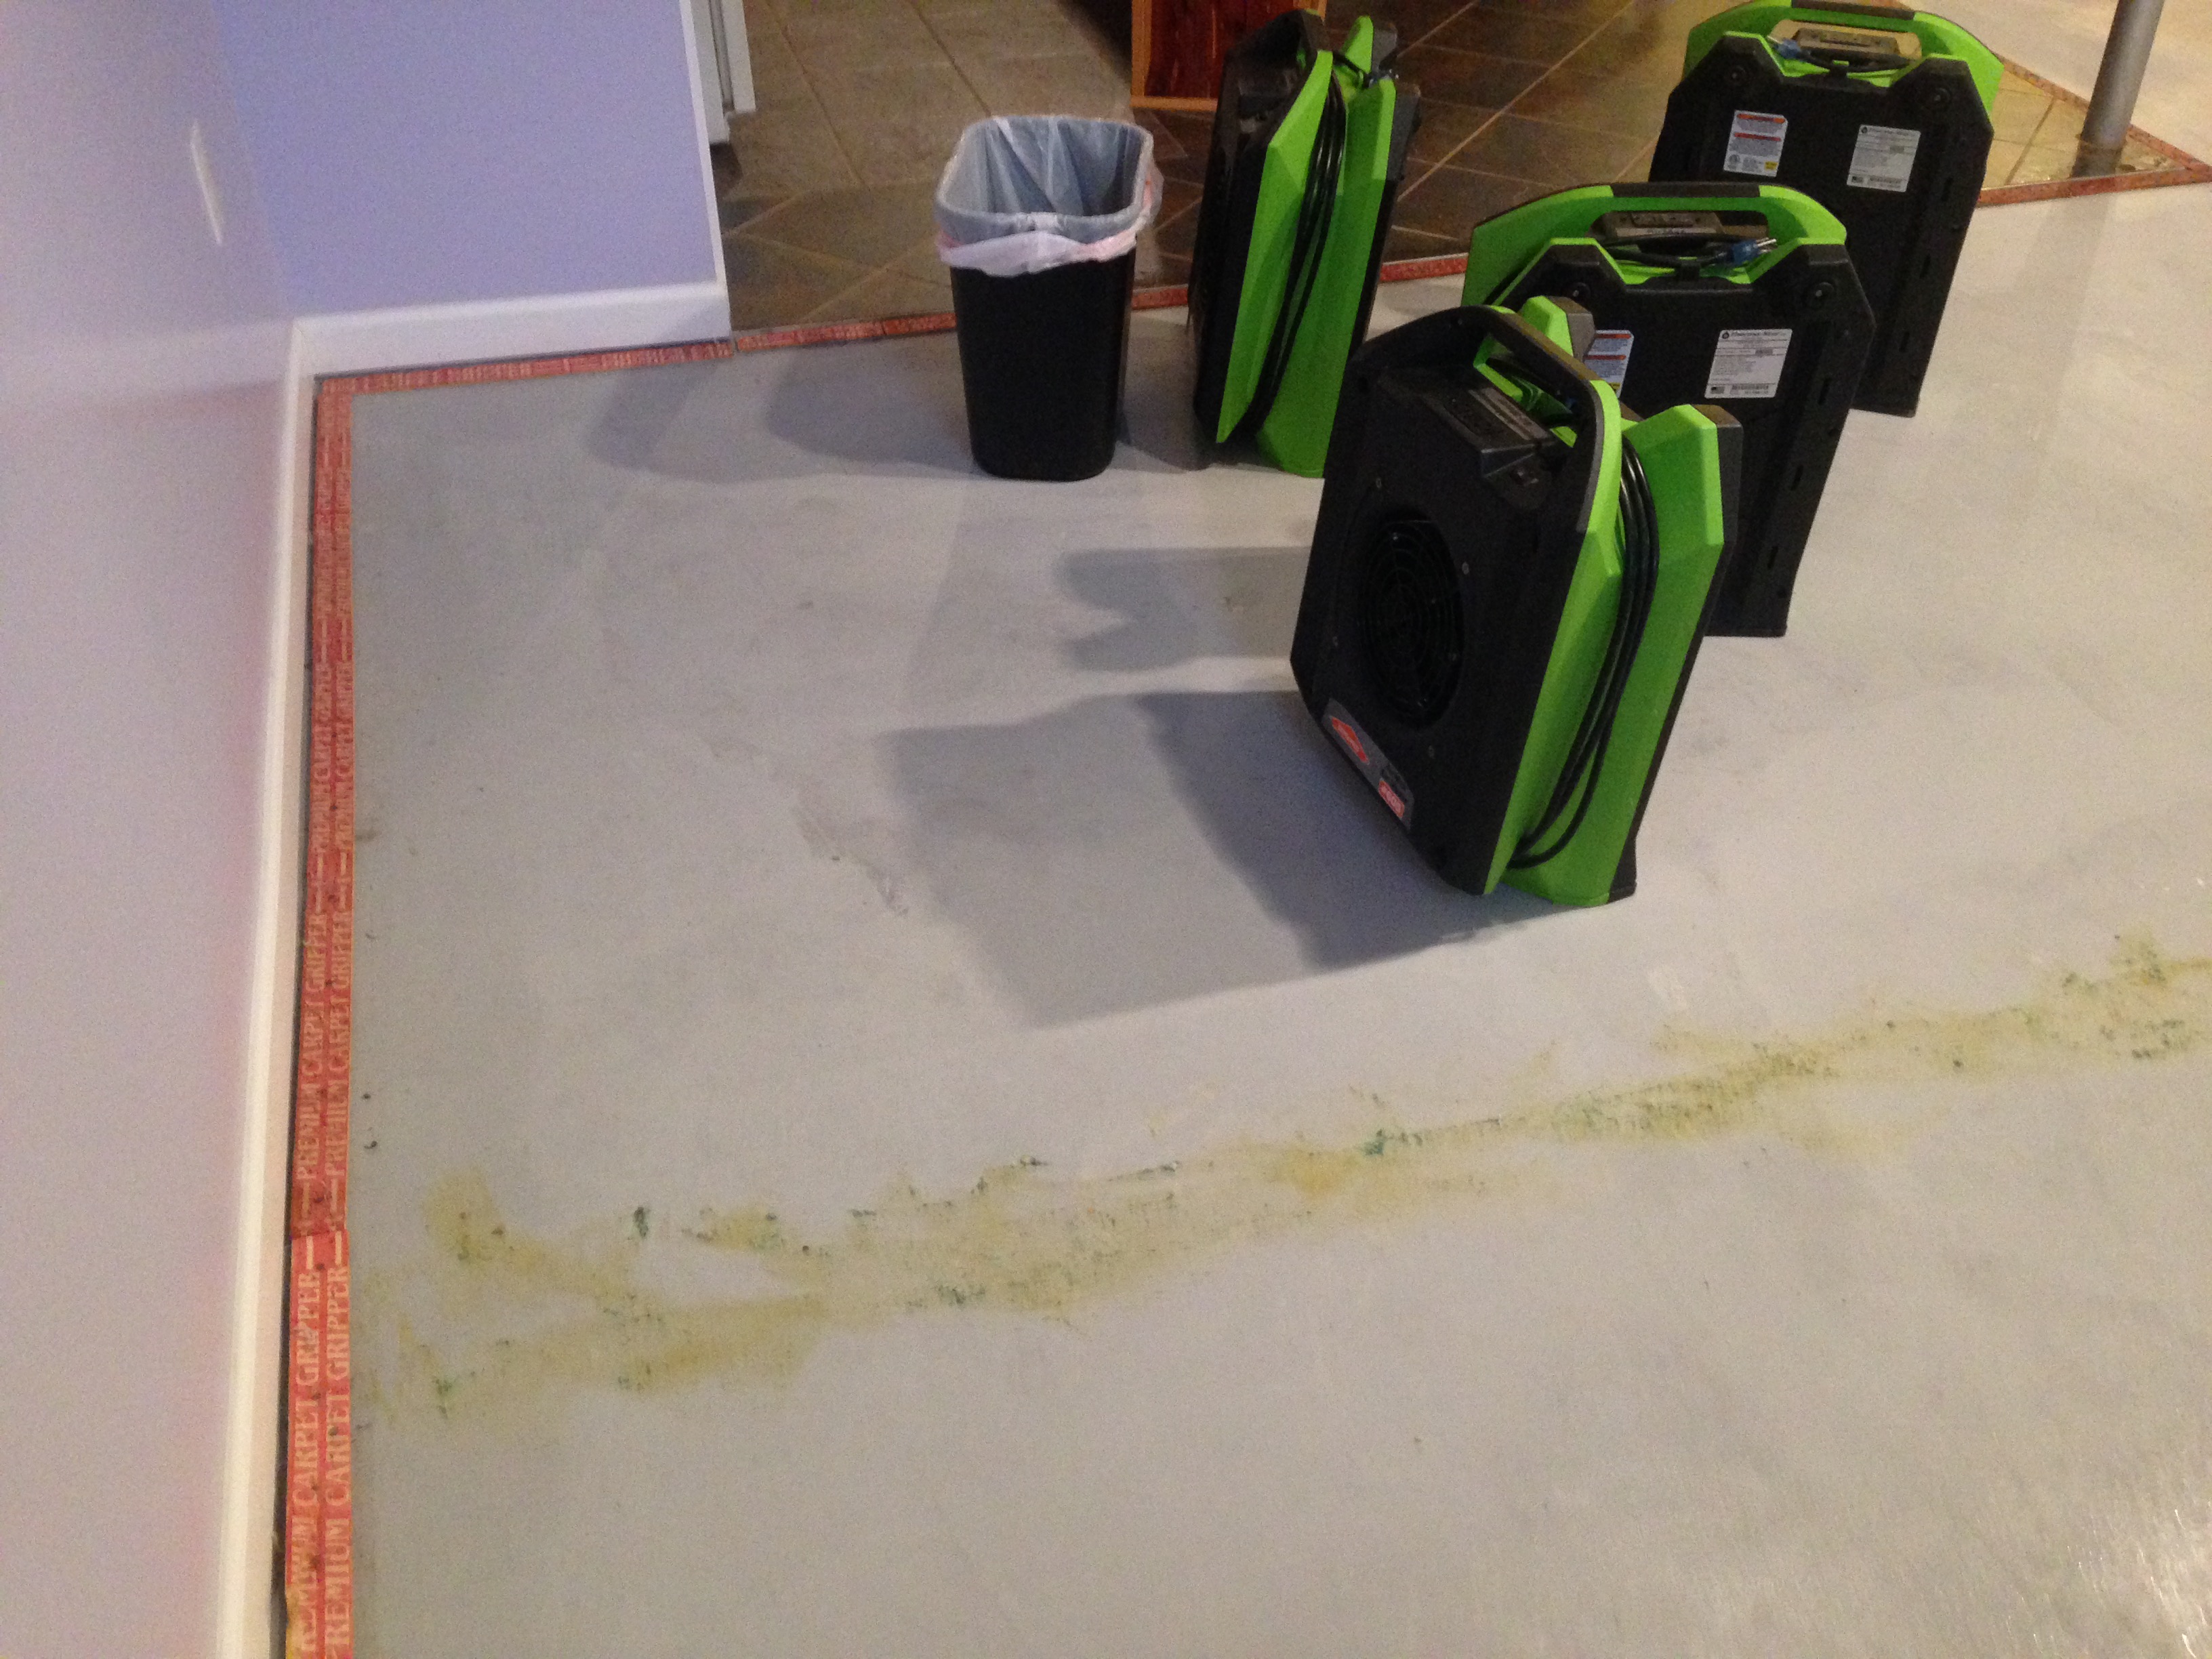 The SERVPRO air movers are up and drying after a water loss.